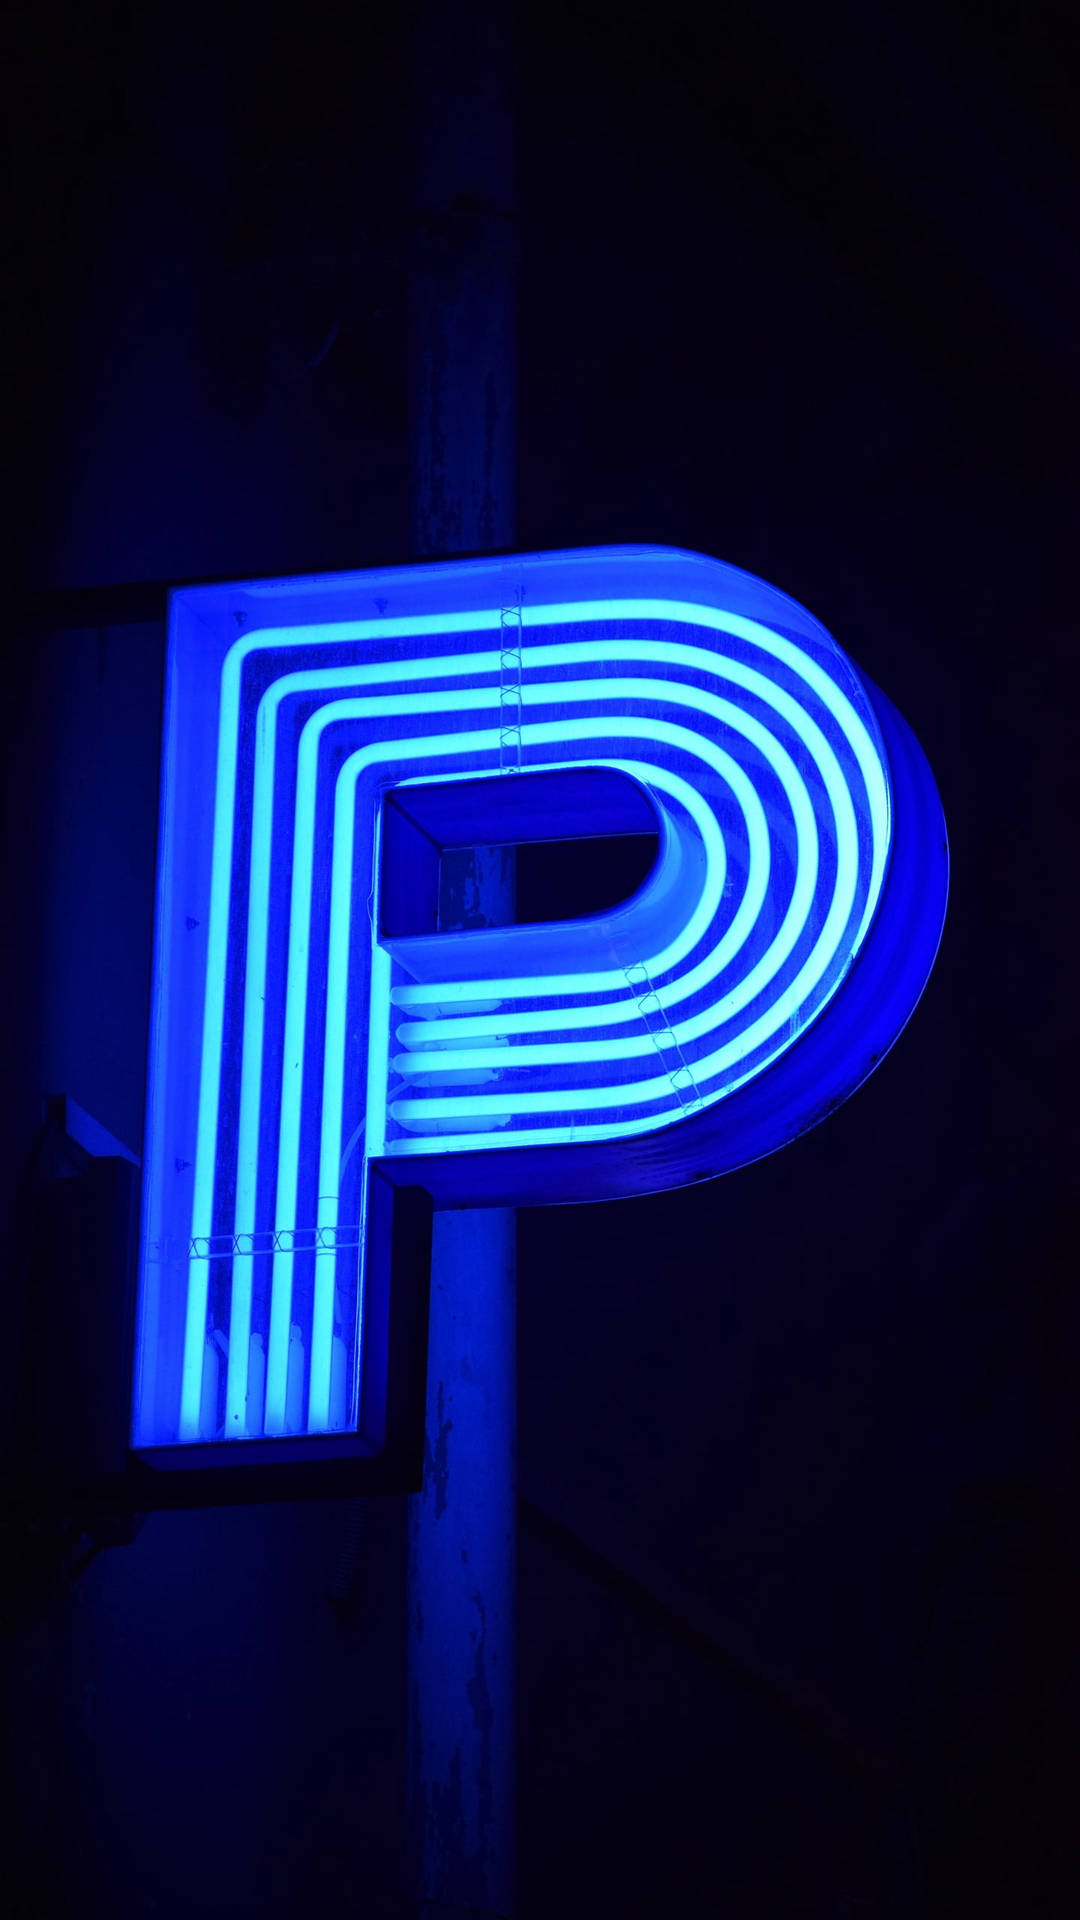 Neon P Letter Background